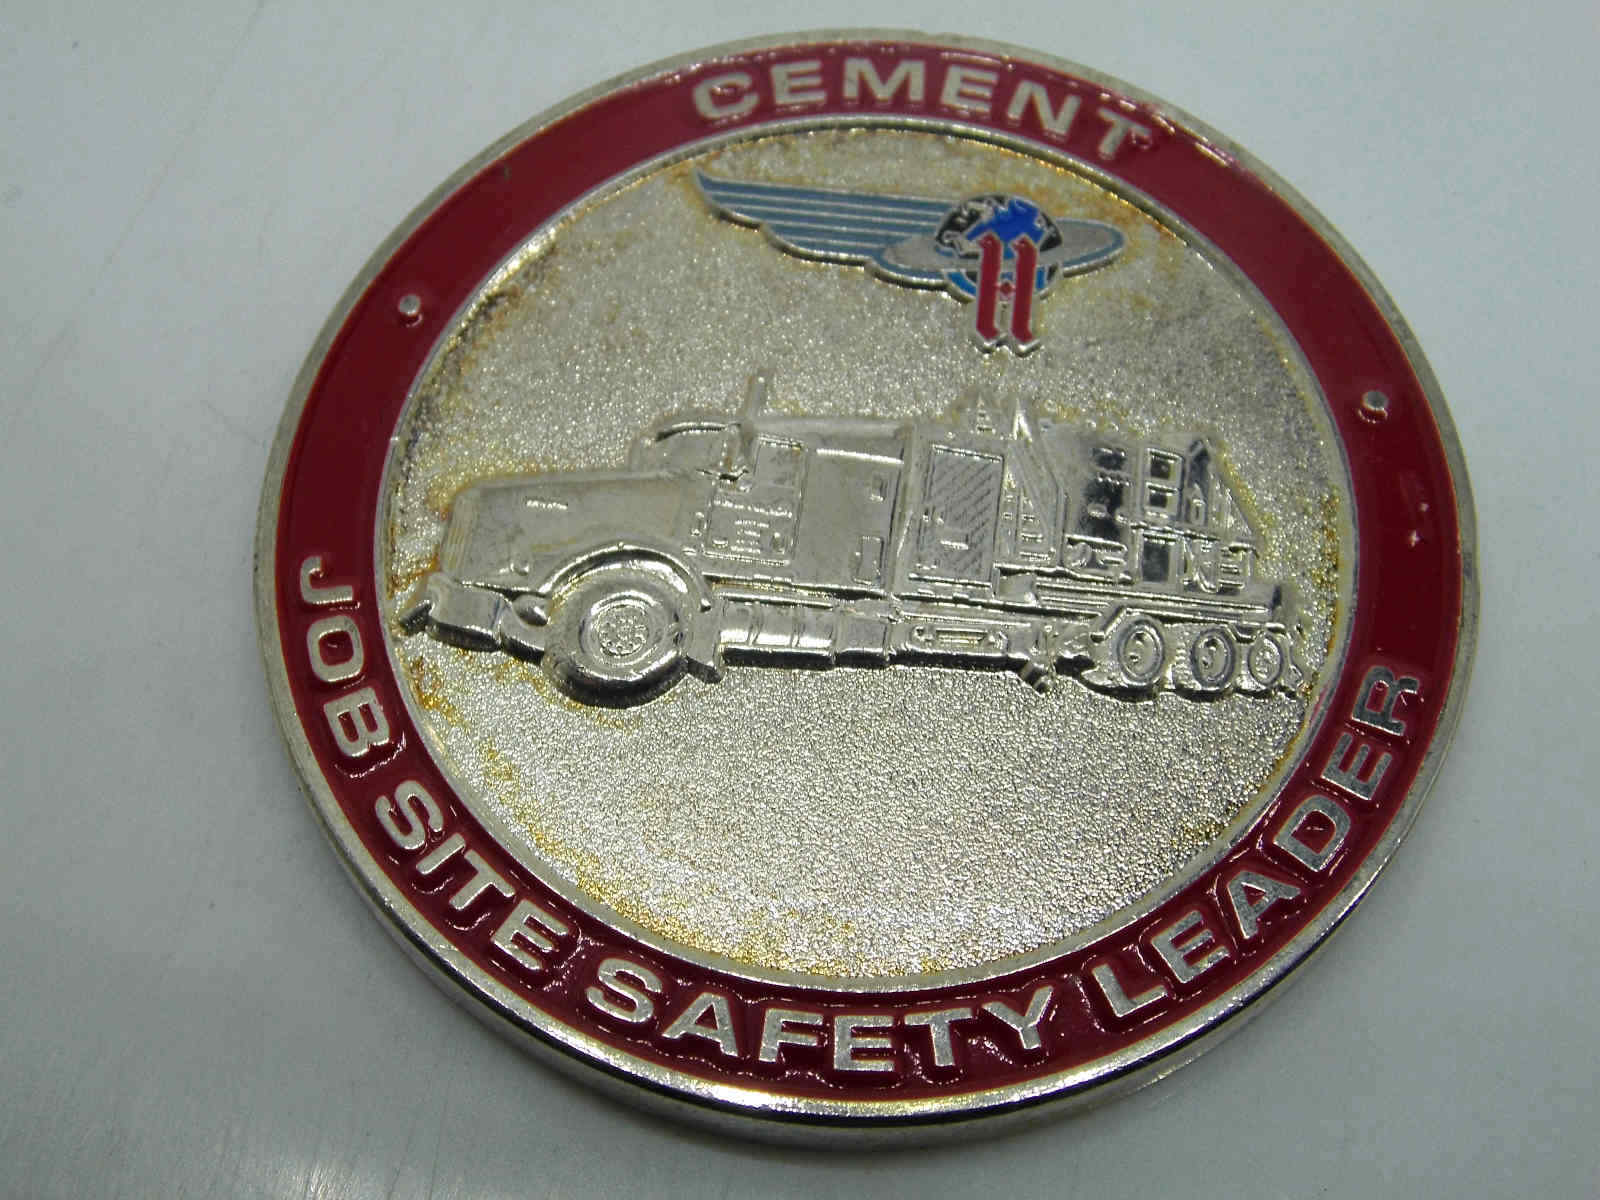 CEMENT JOB SITE SAFETY LEADER CHALLENGE COIN